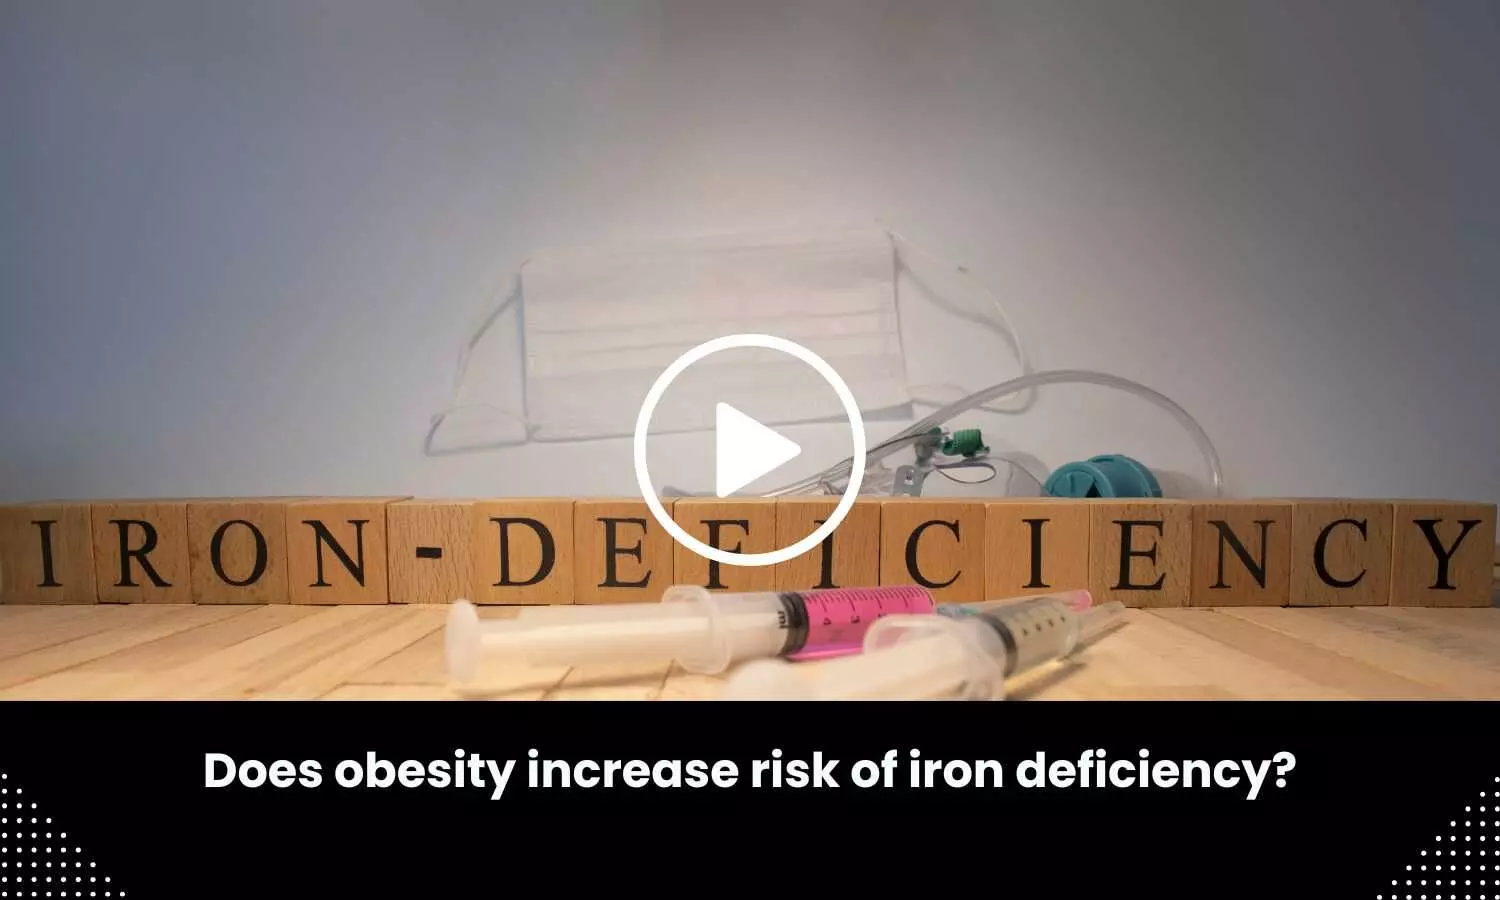 Does obesity increase risk of iron deficiency?